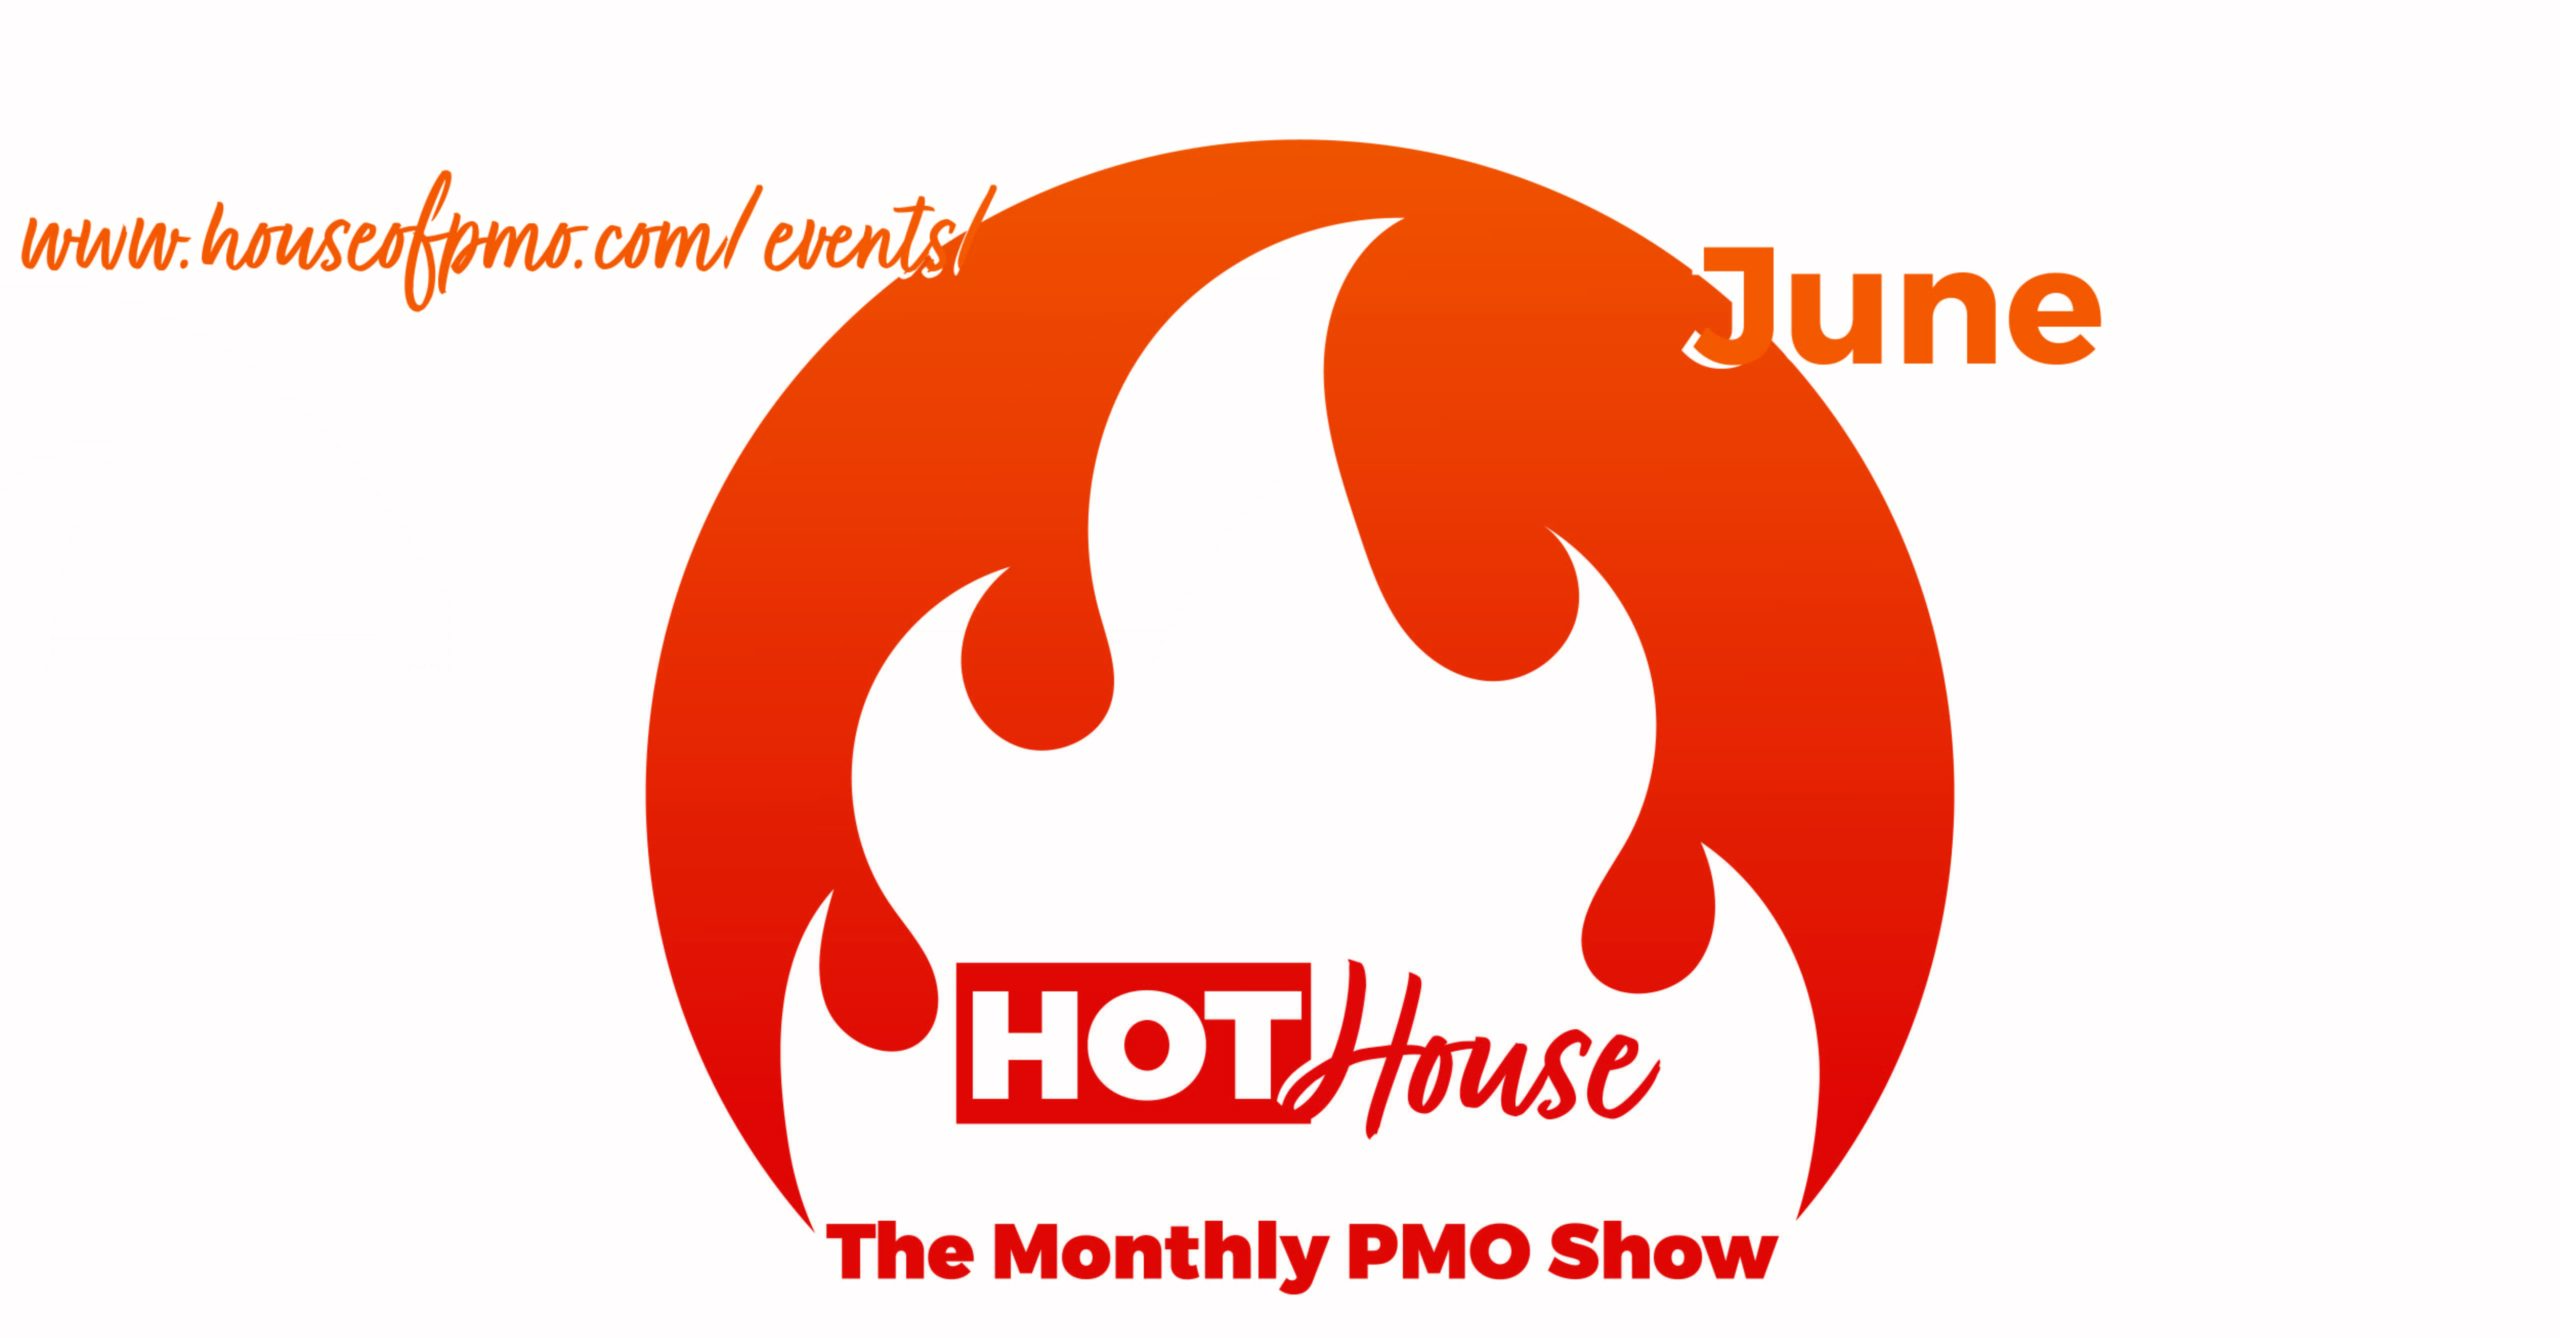 Image for the event PMO Hot house June